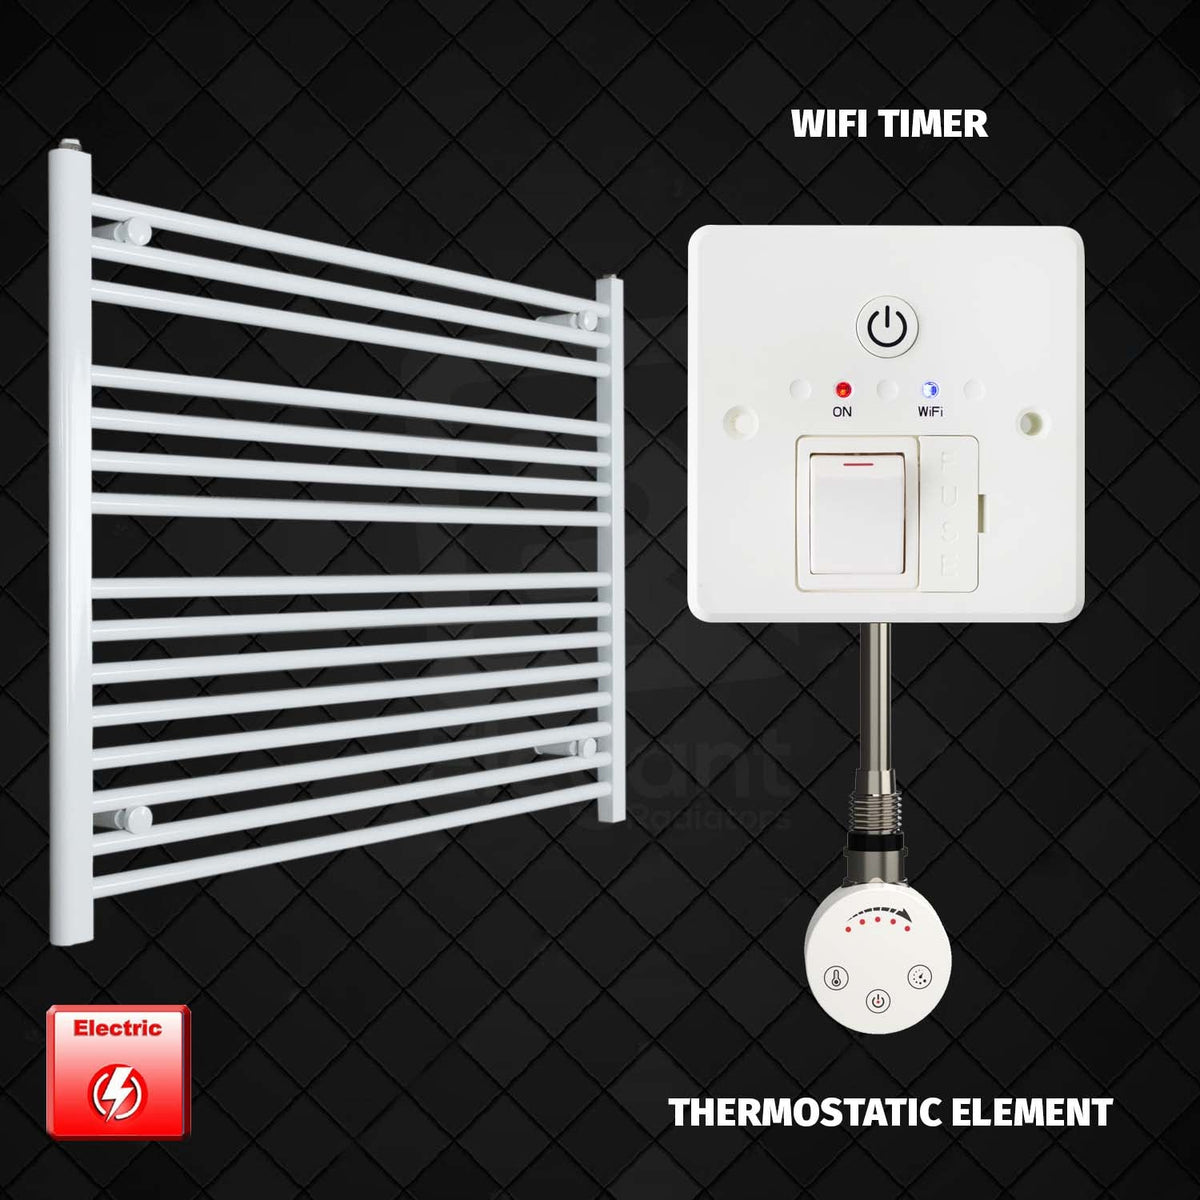 800 x 1200 Pre-Filled Electric Heated Towel Radiator White HTR SMR Thermostatic element Wifi timer